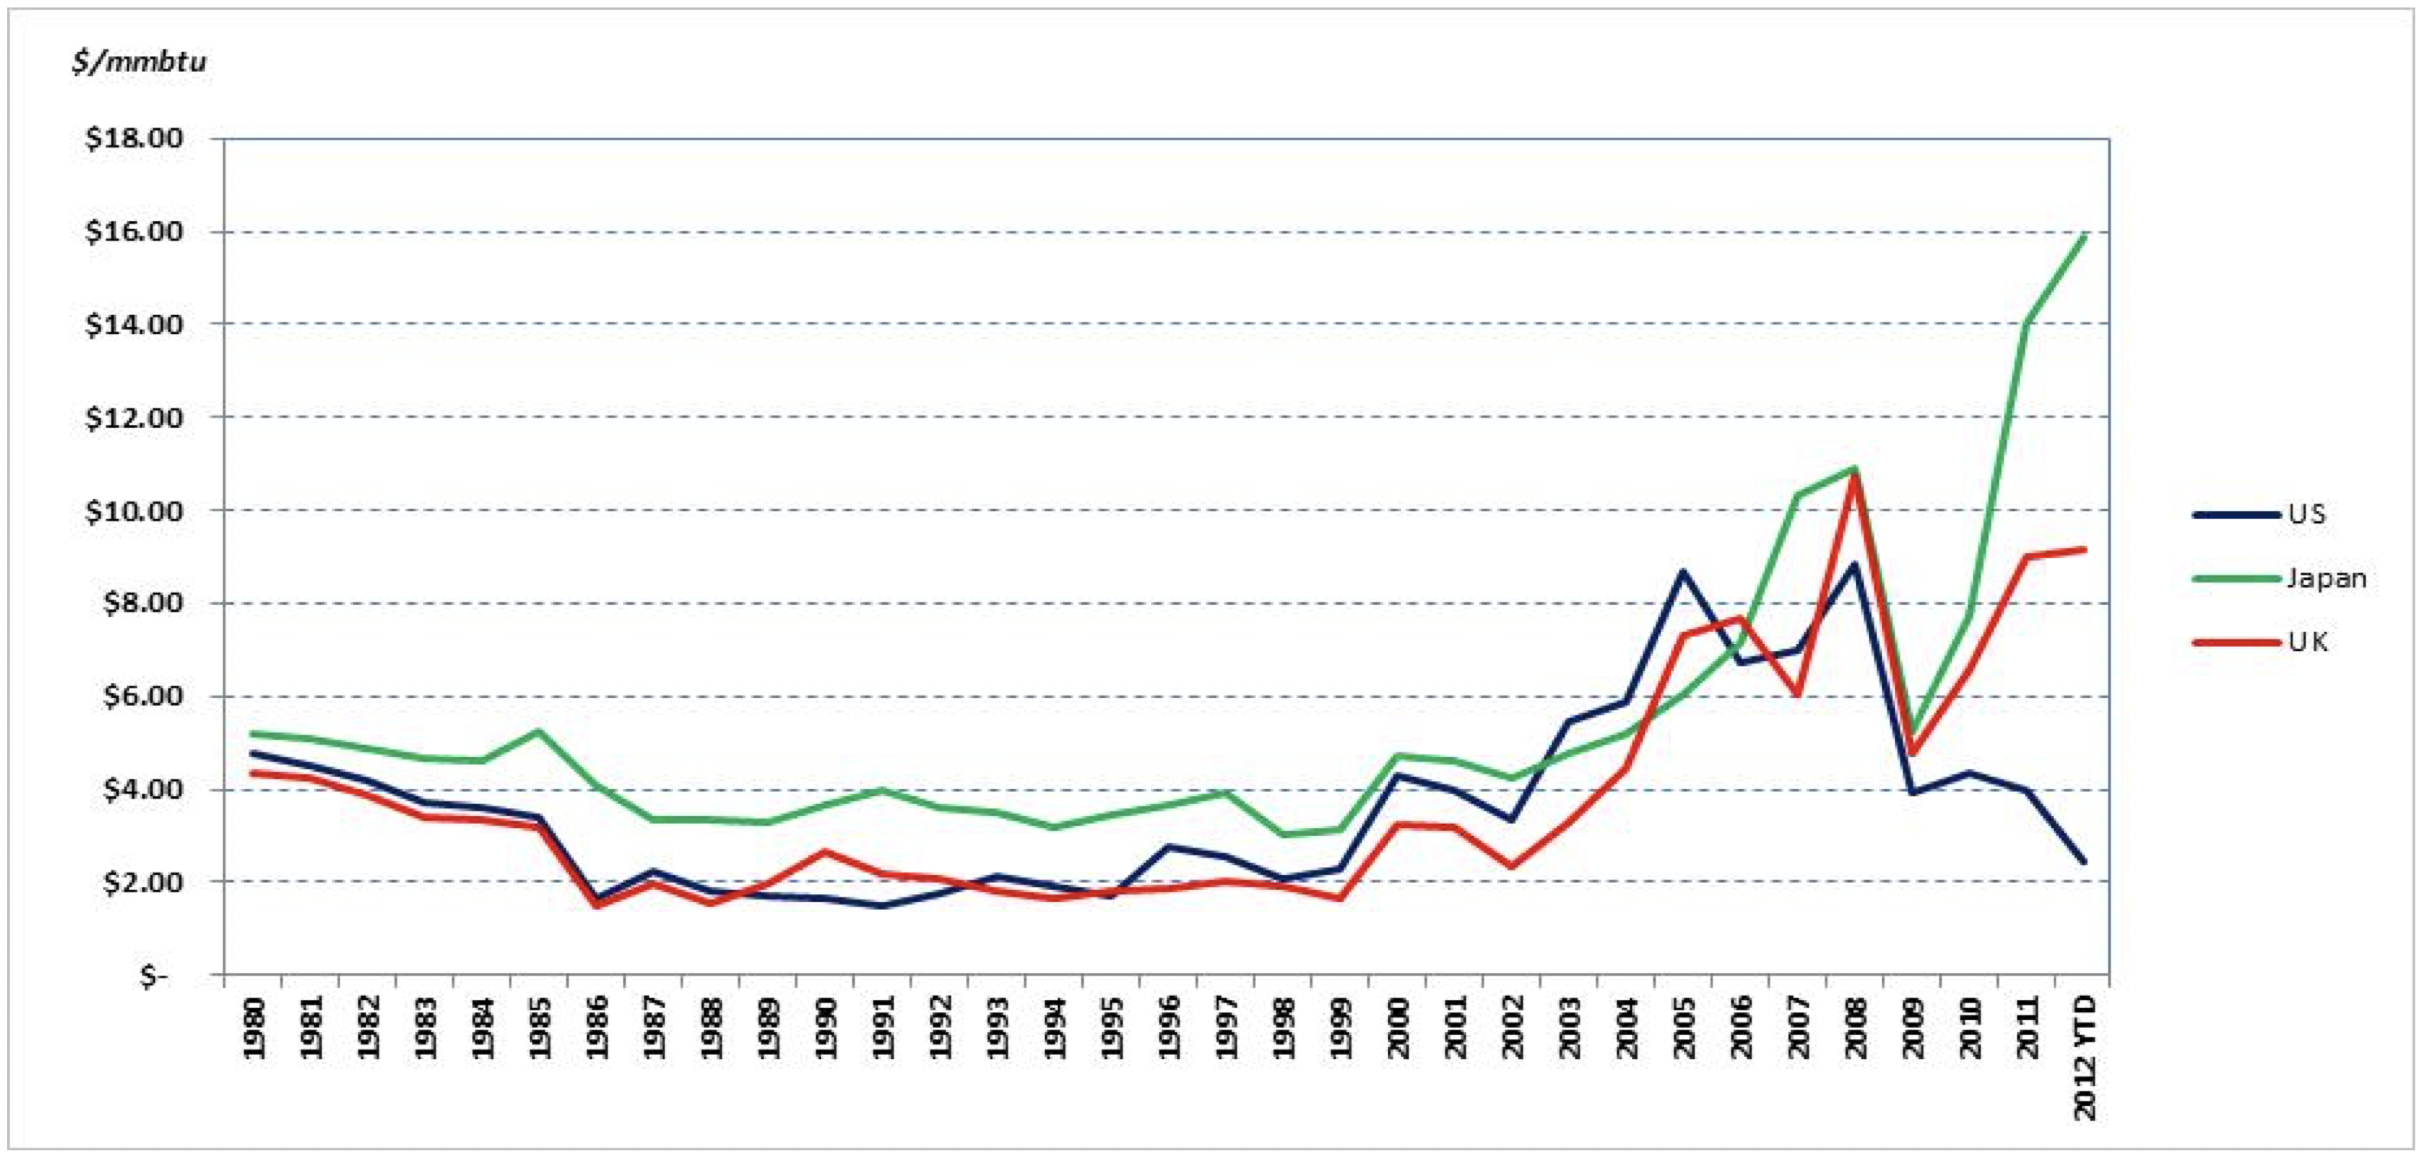 This graph compares regional natural gas prices over time.